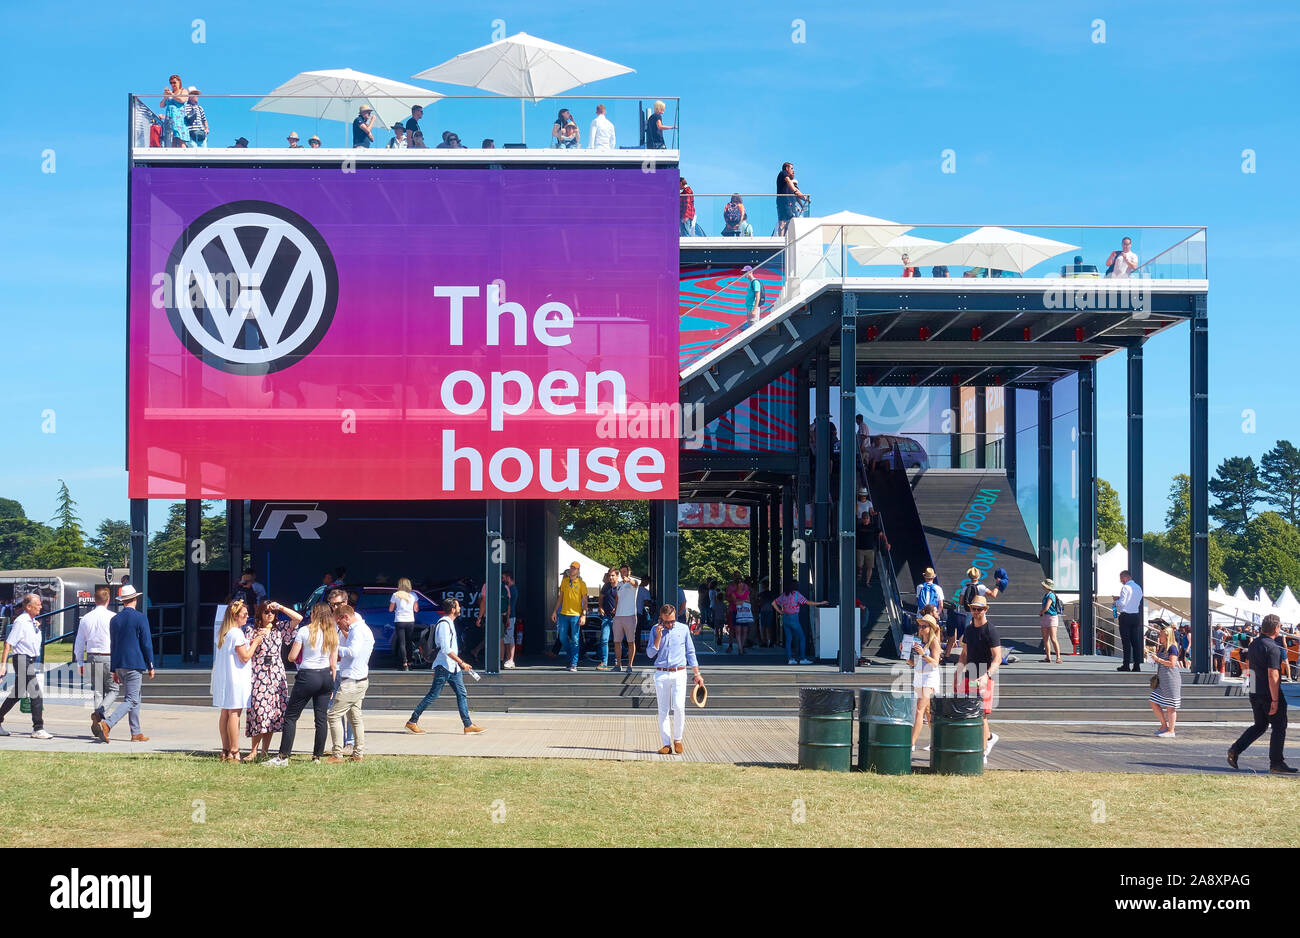 Volkswagen's The Open House stand at Goodwood Festival of Speed, 2019 Stock Photo